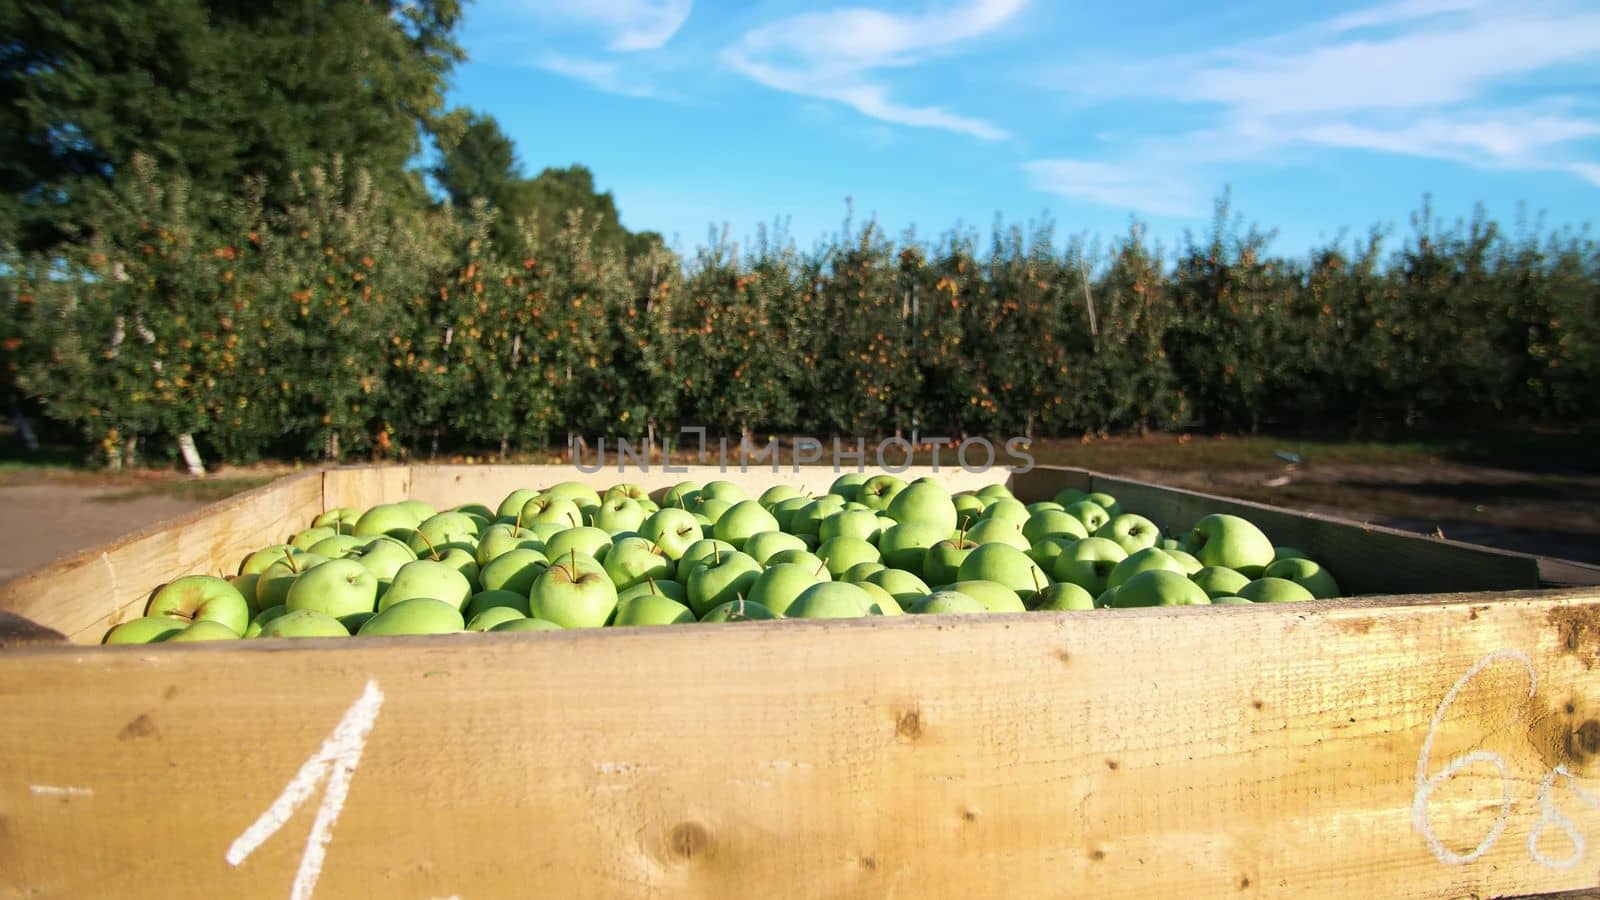 close-up, wooden container, box filled to the top with large green delicious apples during the annual harvesting period in apple orchard. fresh picked apple harvest on farm. High quality photo